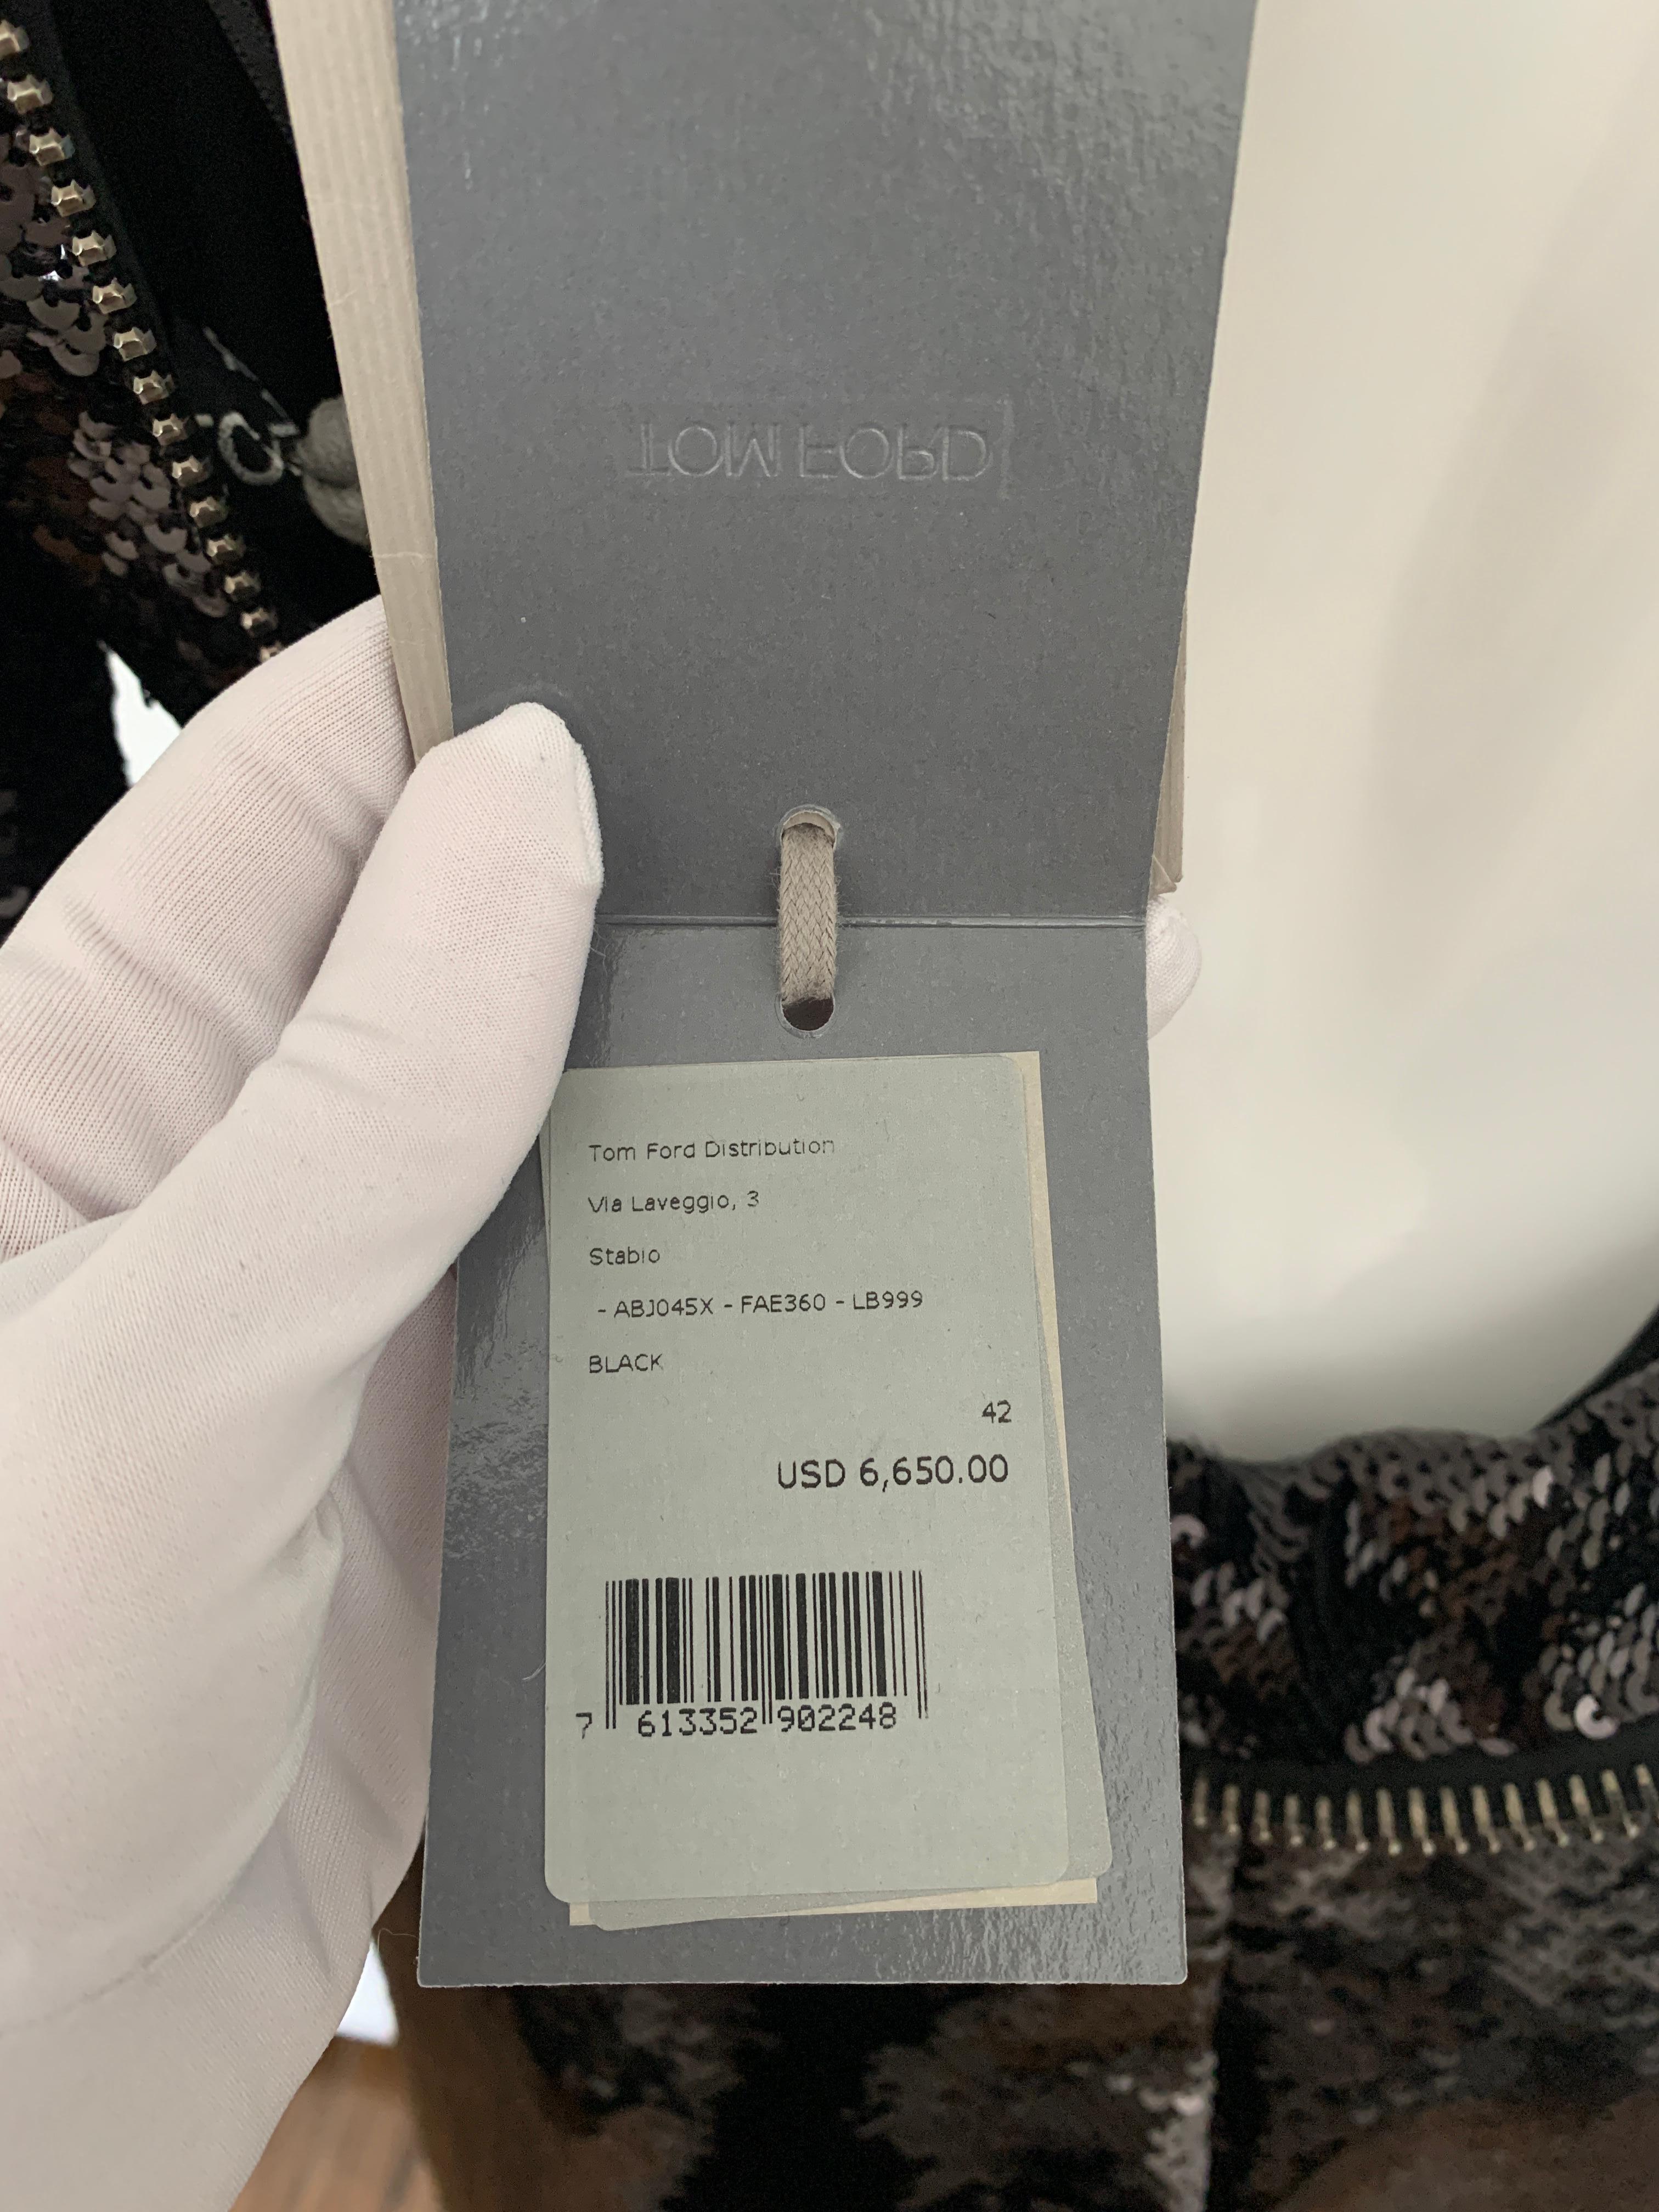 Tom Ford Black, Signature, Open Back, Zip Liquid Sequin Dress with tags still attached. 

Size 42

Please see the description below from Tom Ford site: 

A SIGNATURE TOM FORD GUNMETAL ZIP CREATES AN ALLURING OPEN-BACK DRESS WITH A HIGH NECKLINE.